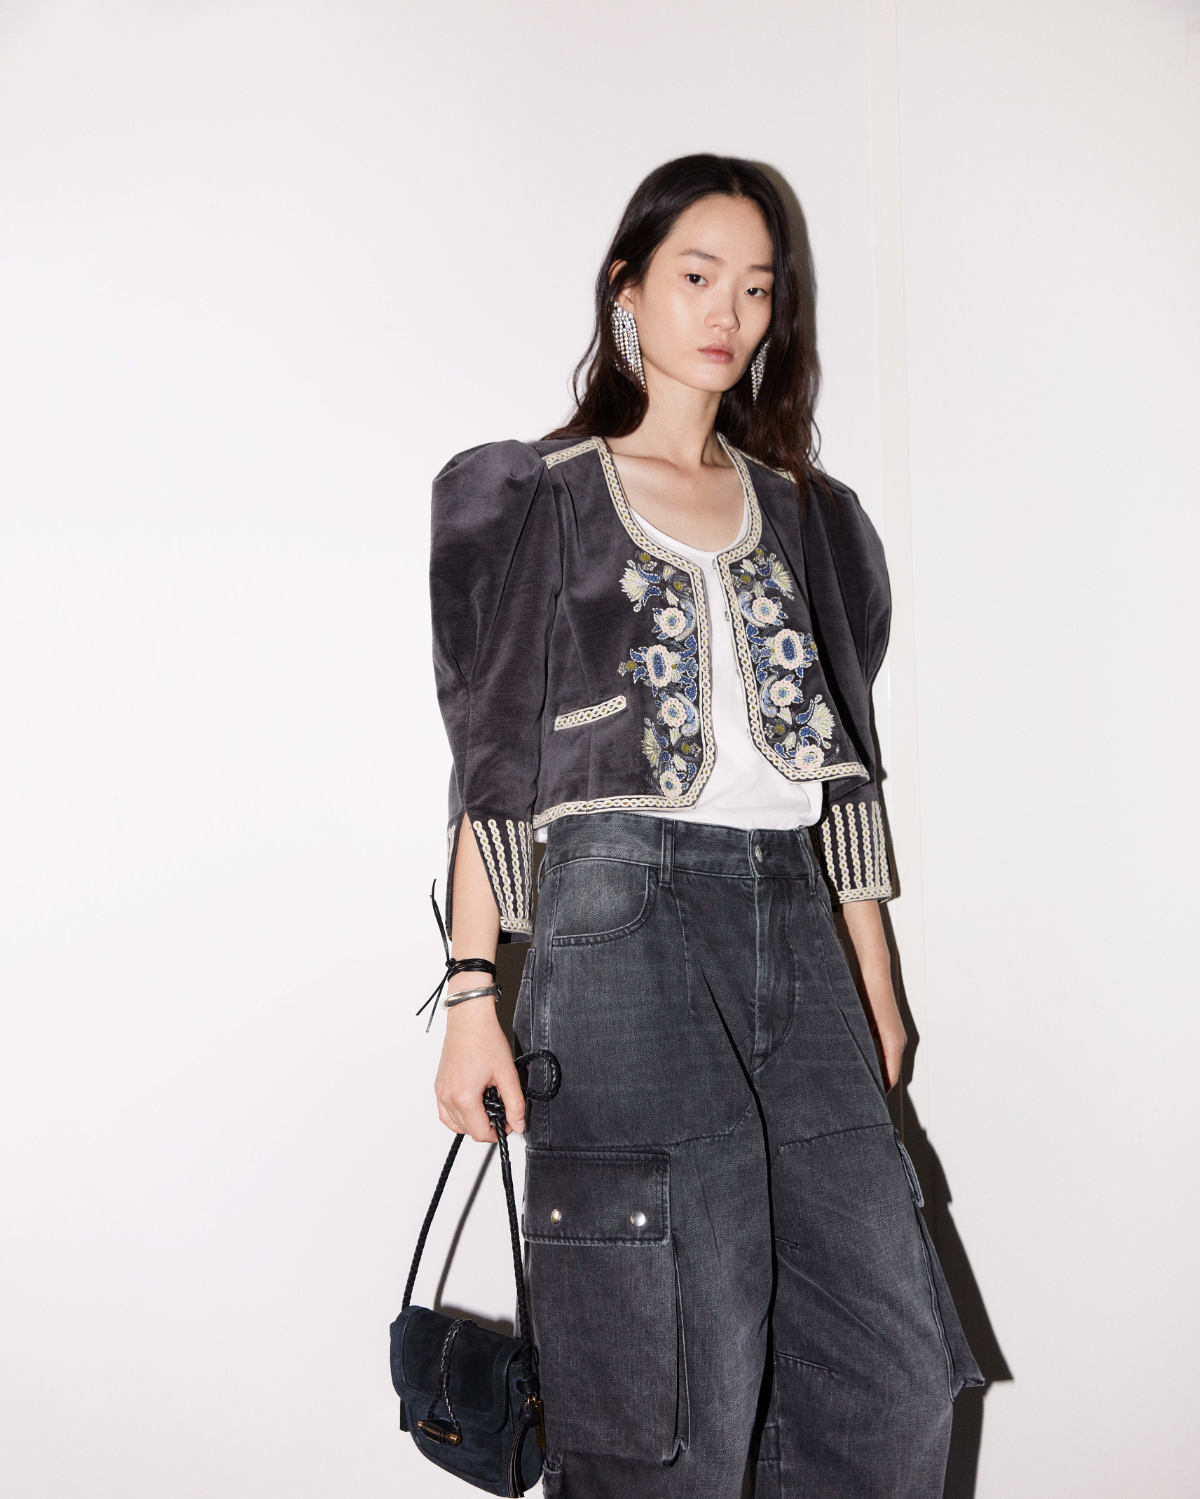 Isabel Marant Presents Her New Pre-Fall 2023 Women Collection